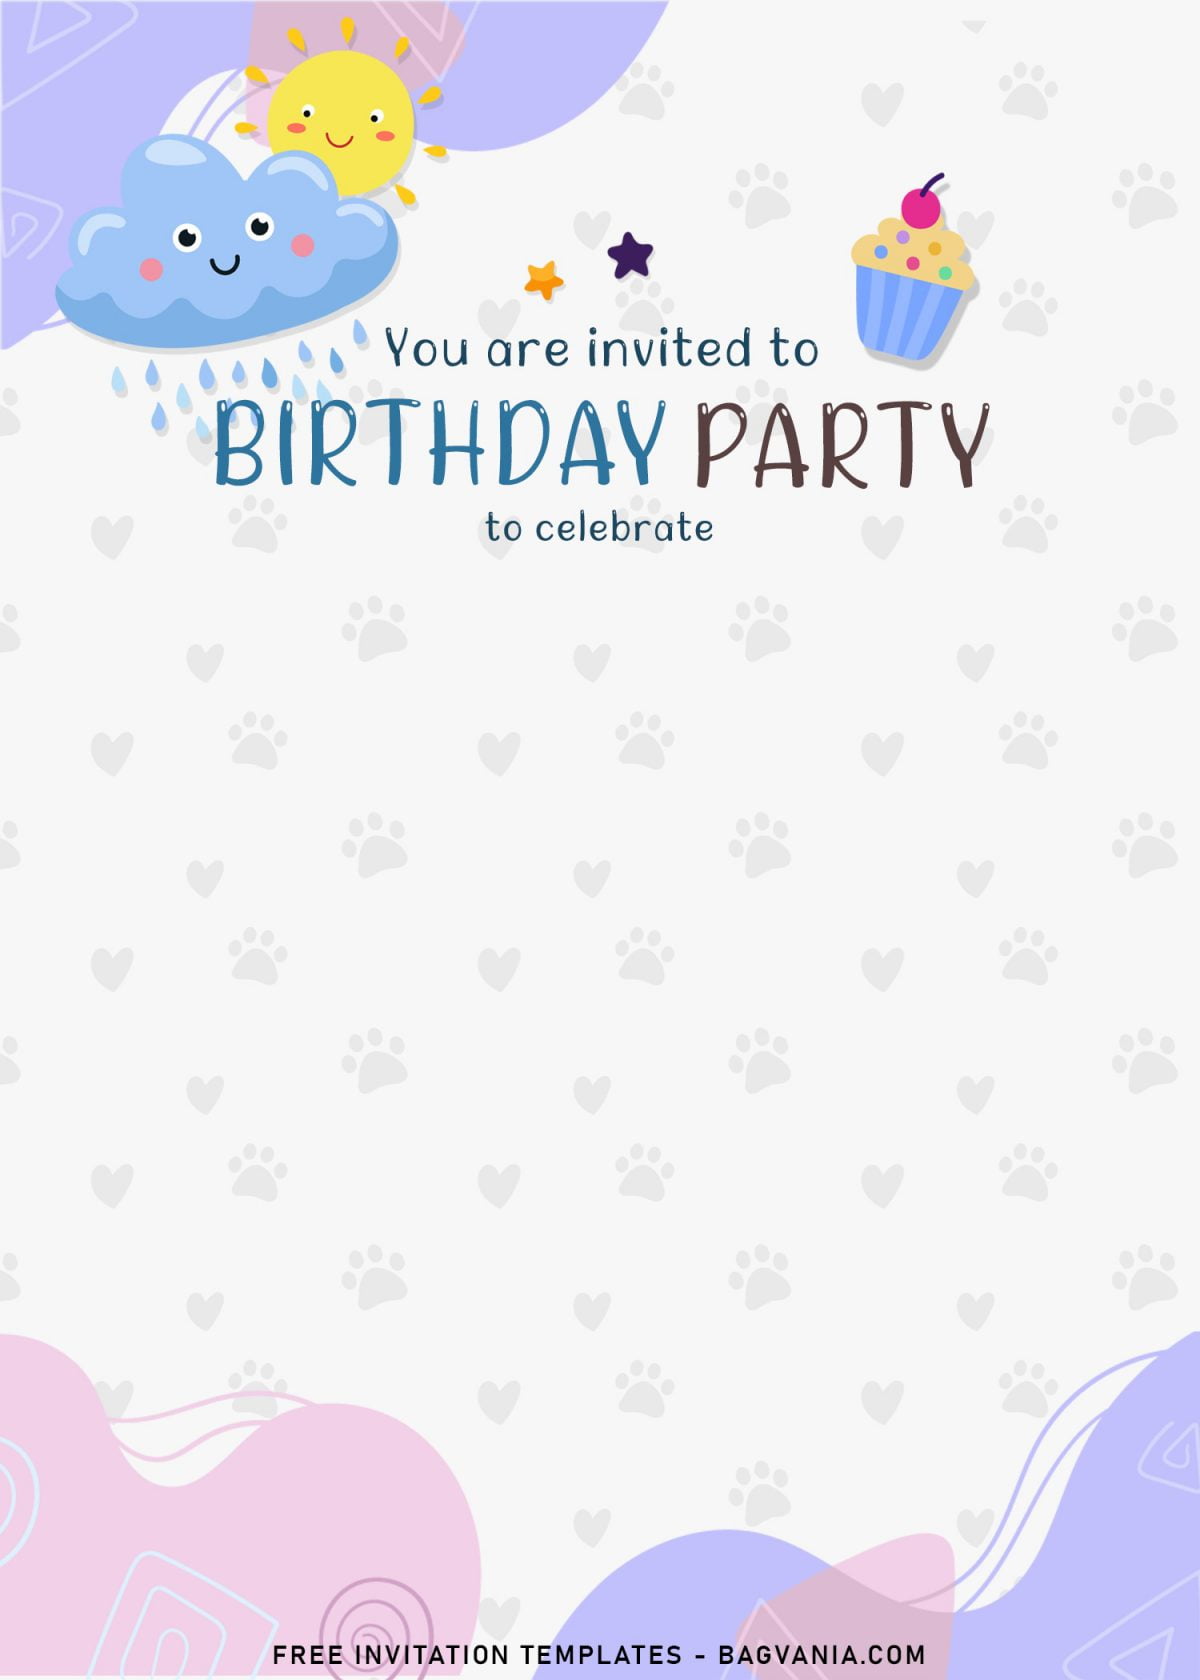 8+ Colorful Hand Drawn Birthday Invitation Templates For Your Kid's Birthday and has cute birthday cake with candle